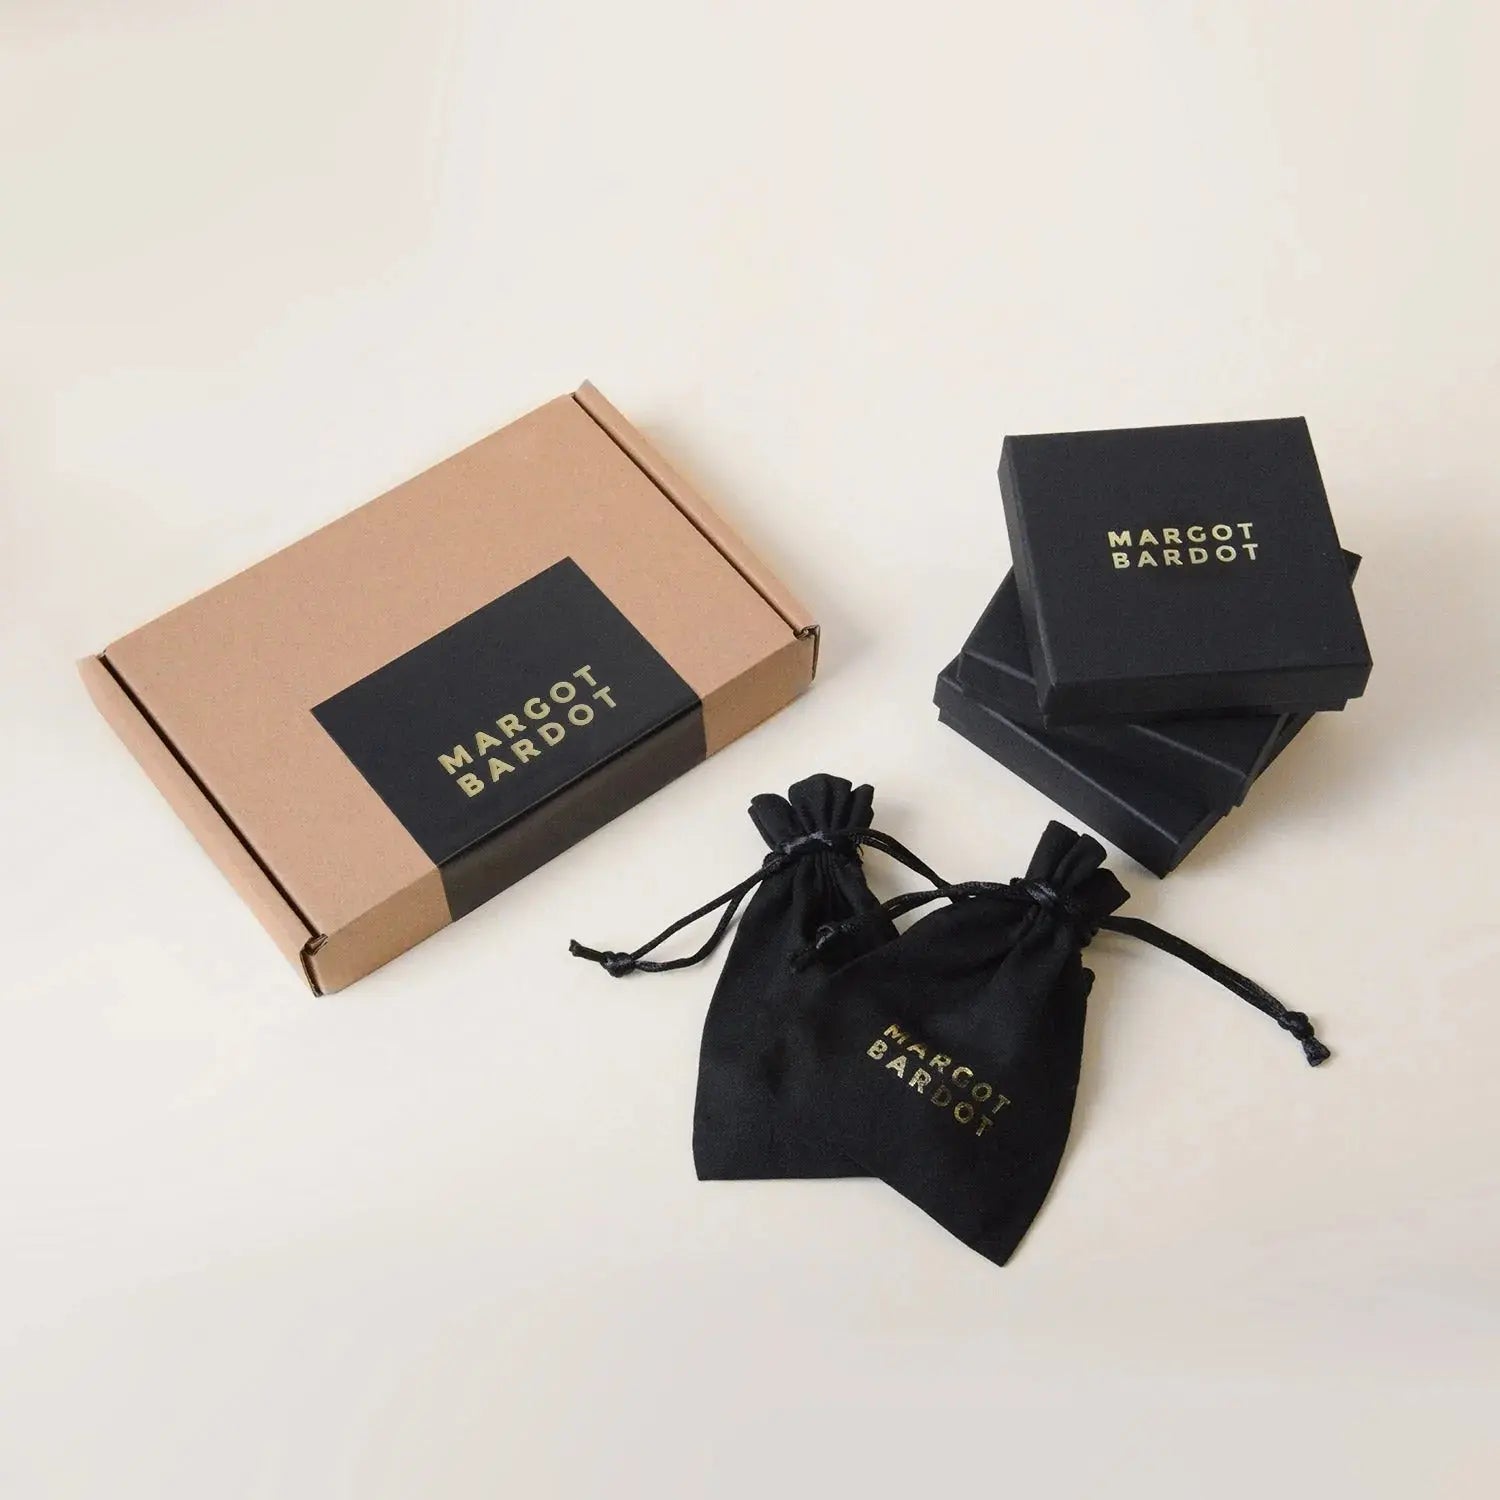 Personalized box and packaging of Maeva Earrings - Gold Margot Bardot Online